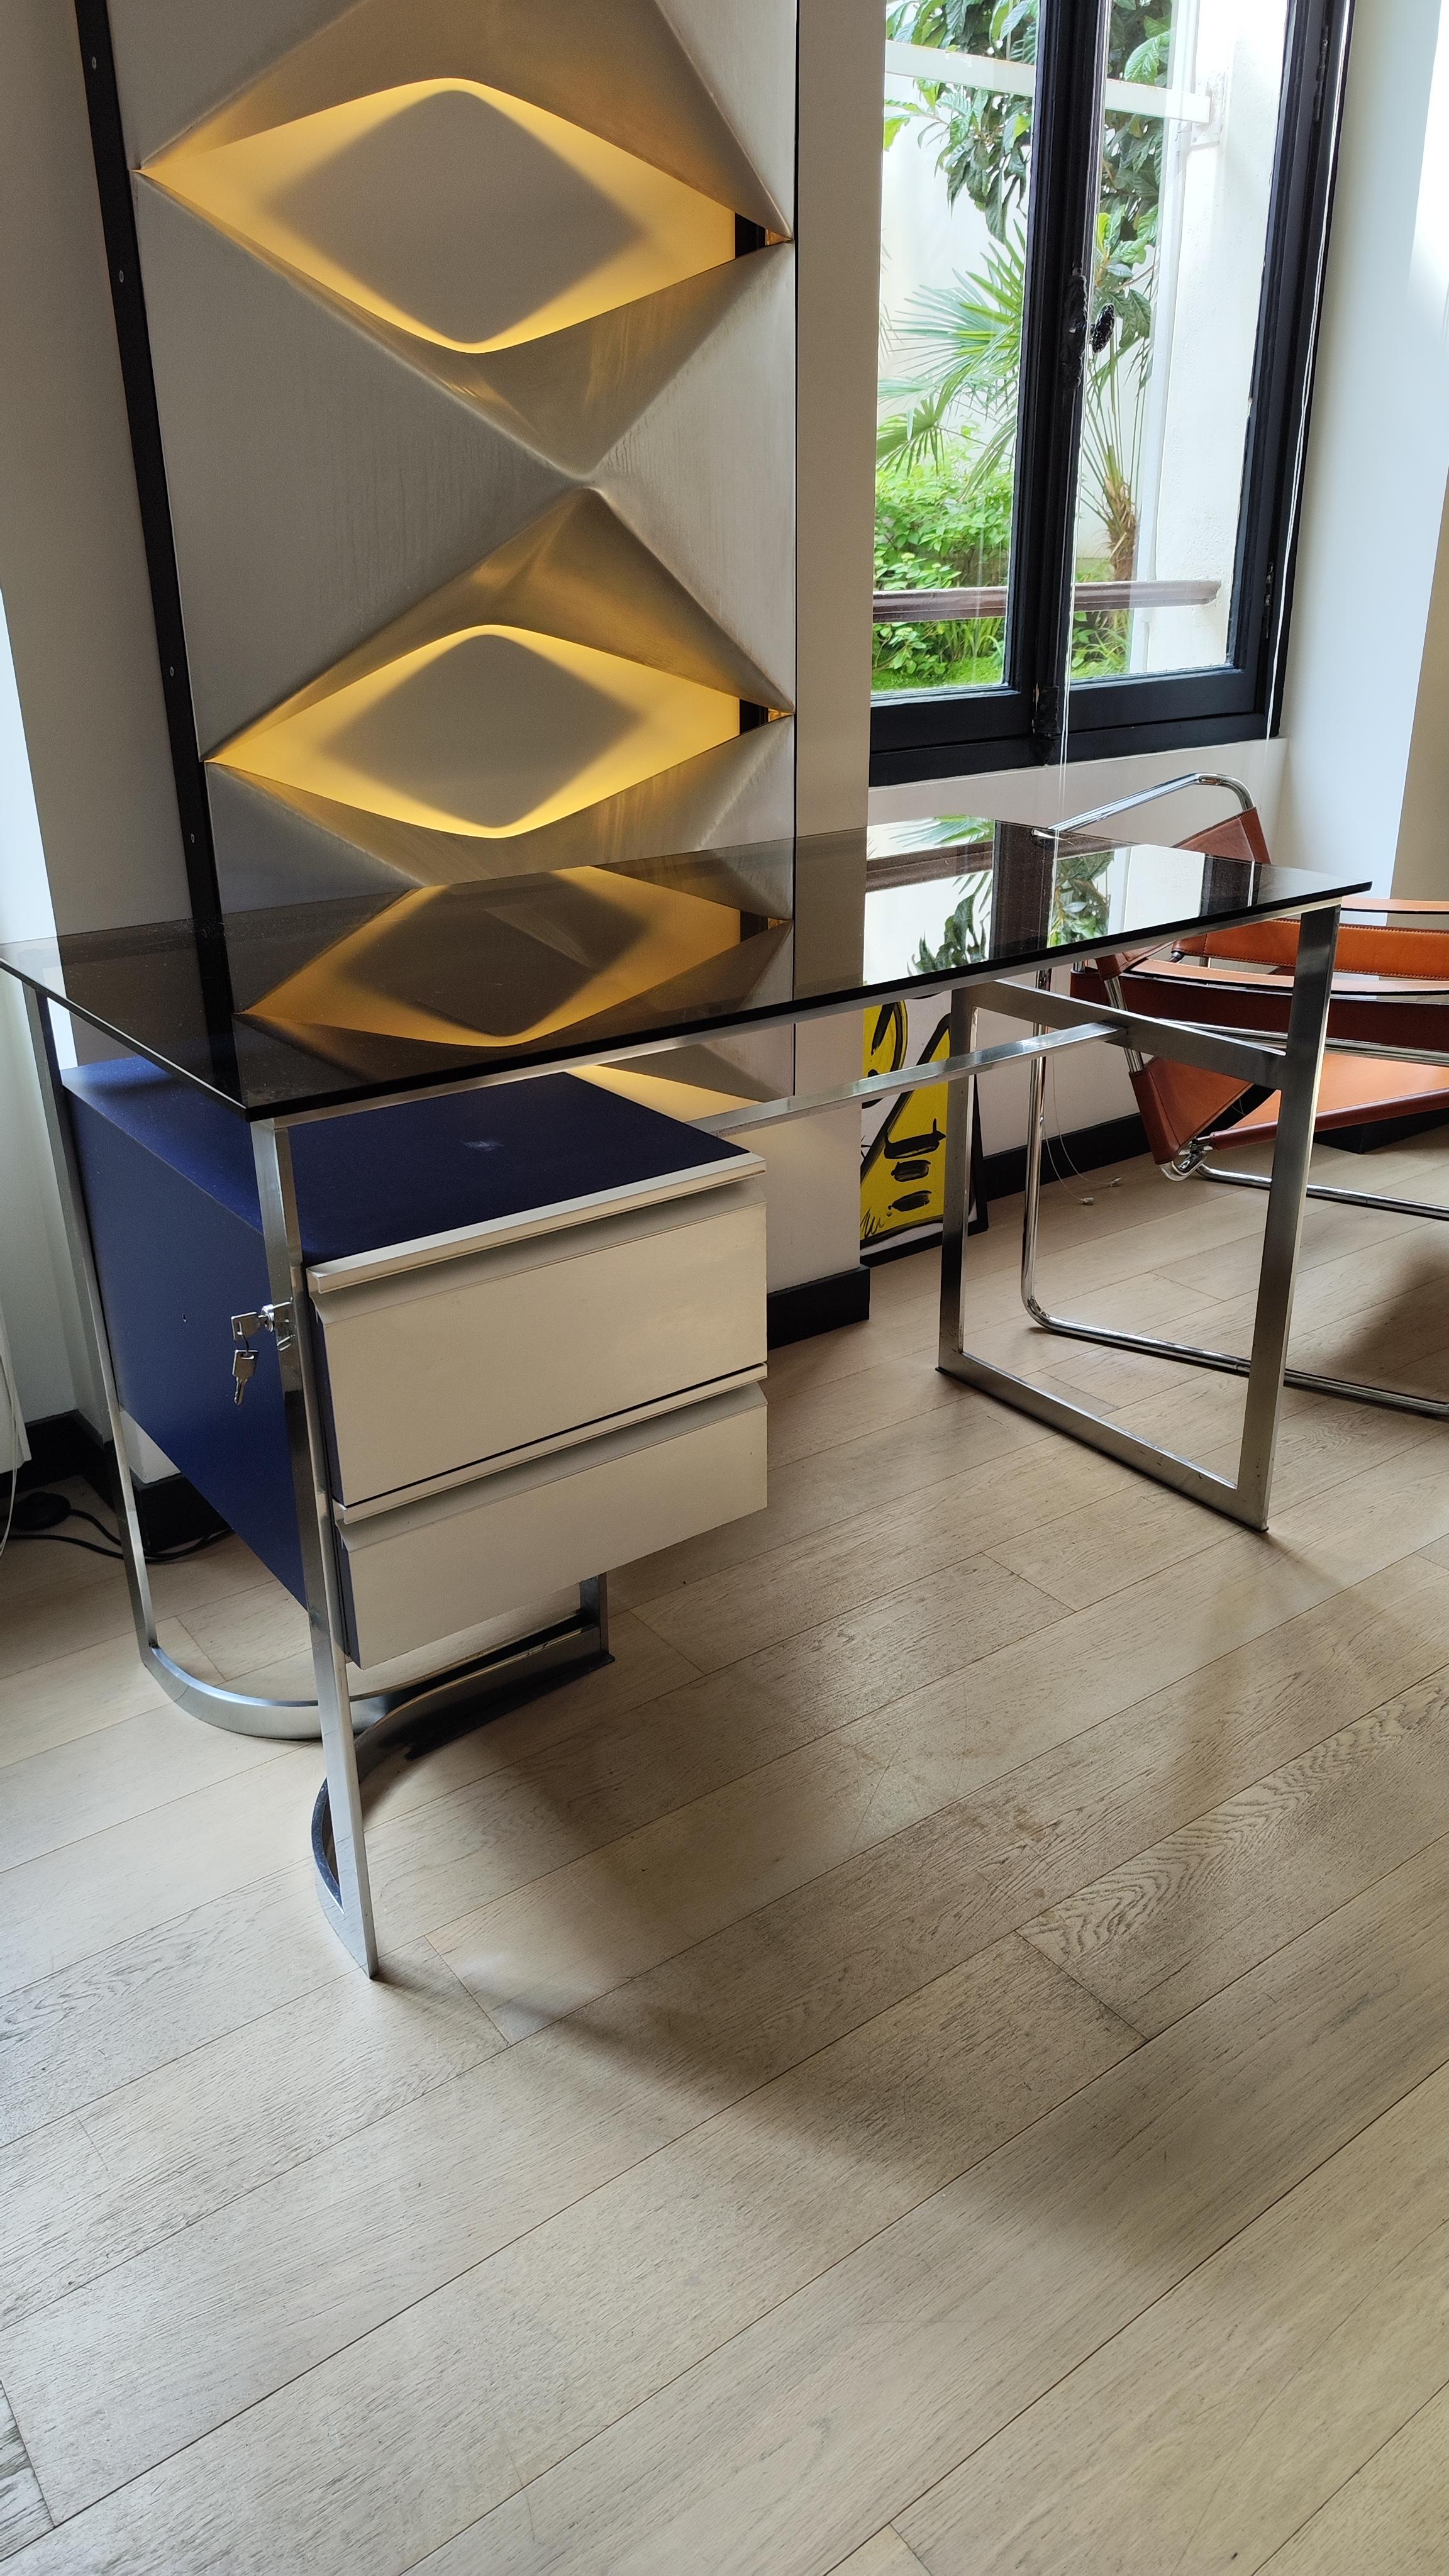 Patrice Maffei Desk for Kappa, 70s, Brushed Stainless Steel, Smoked Glass, 1970 For Sale 4